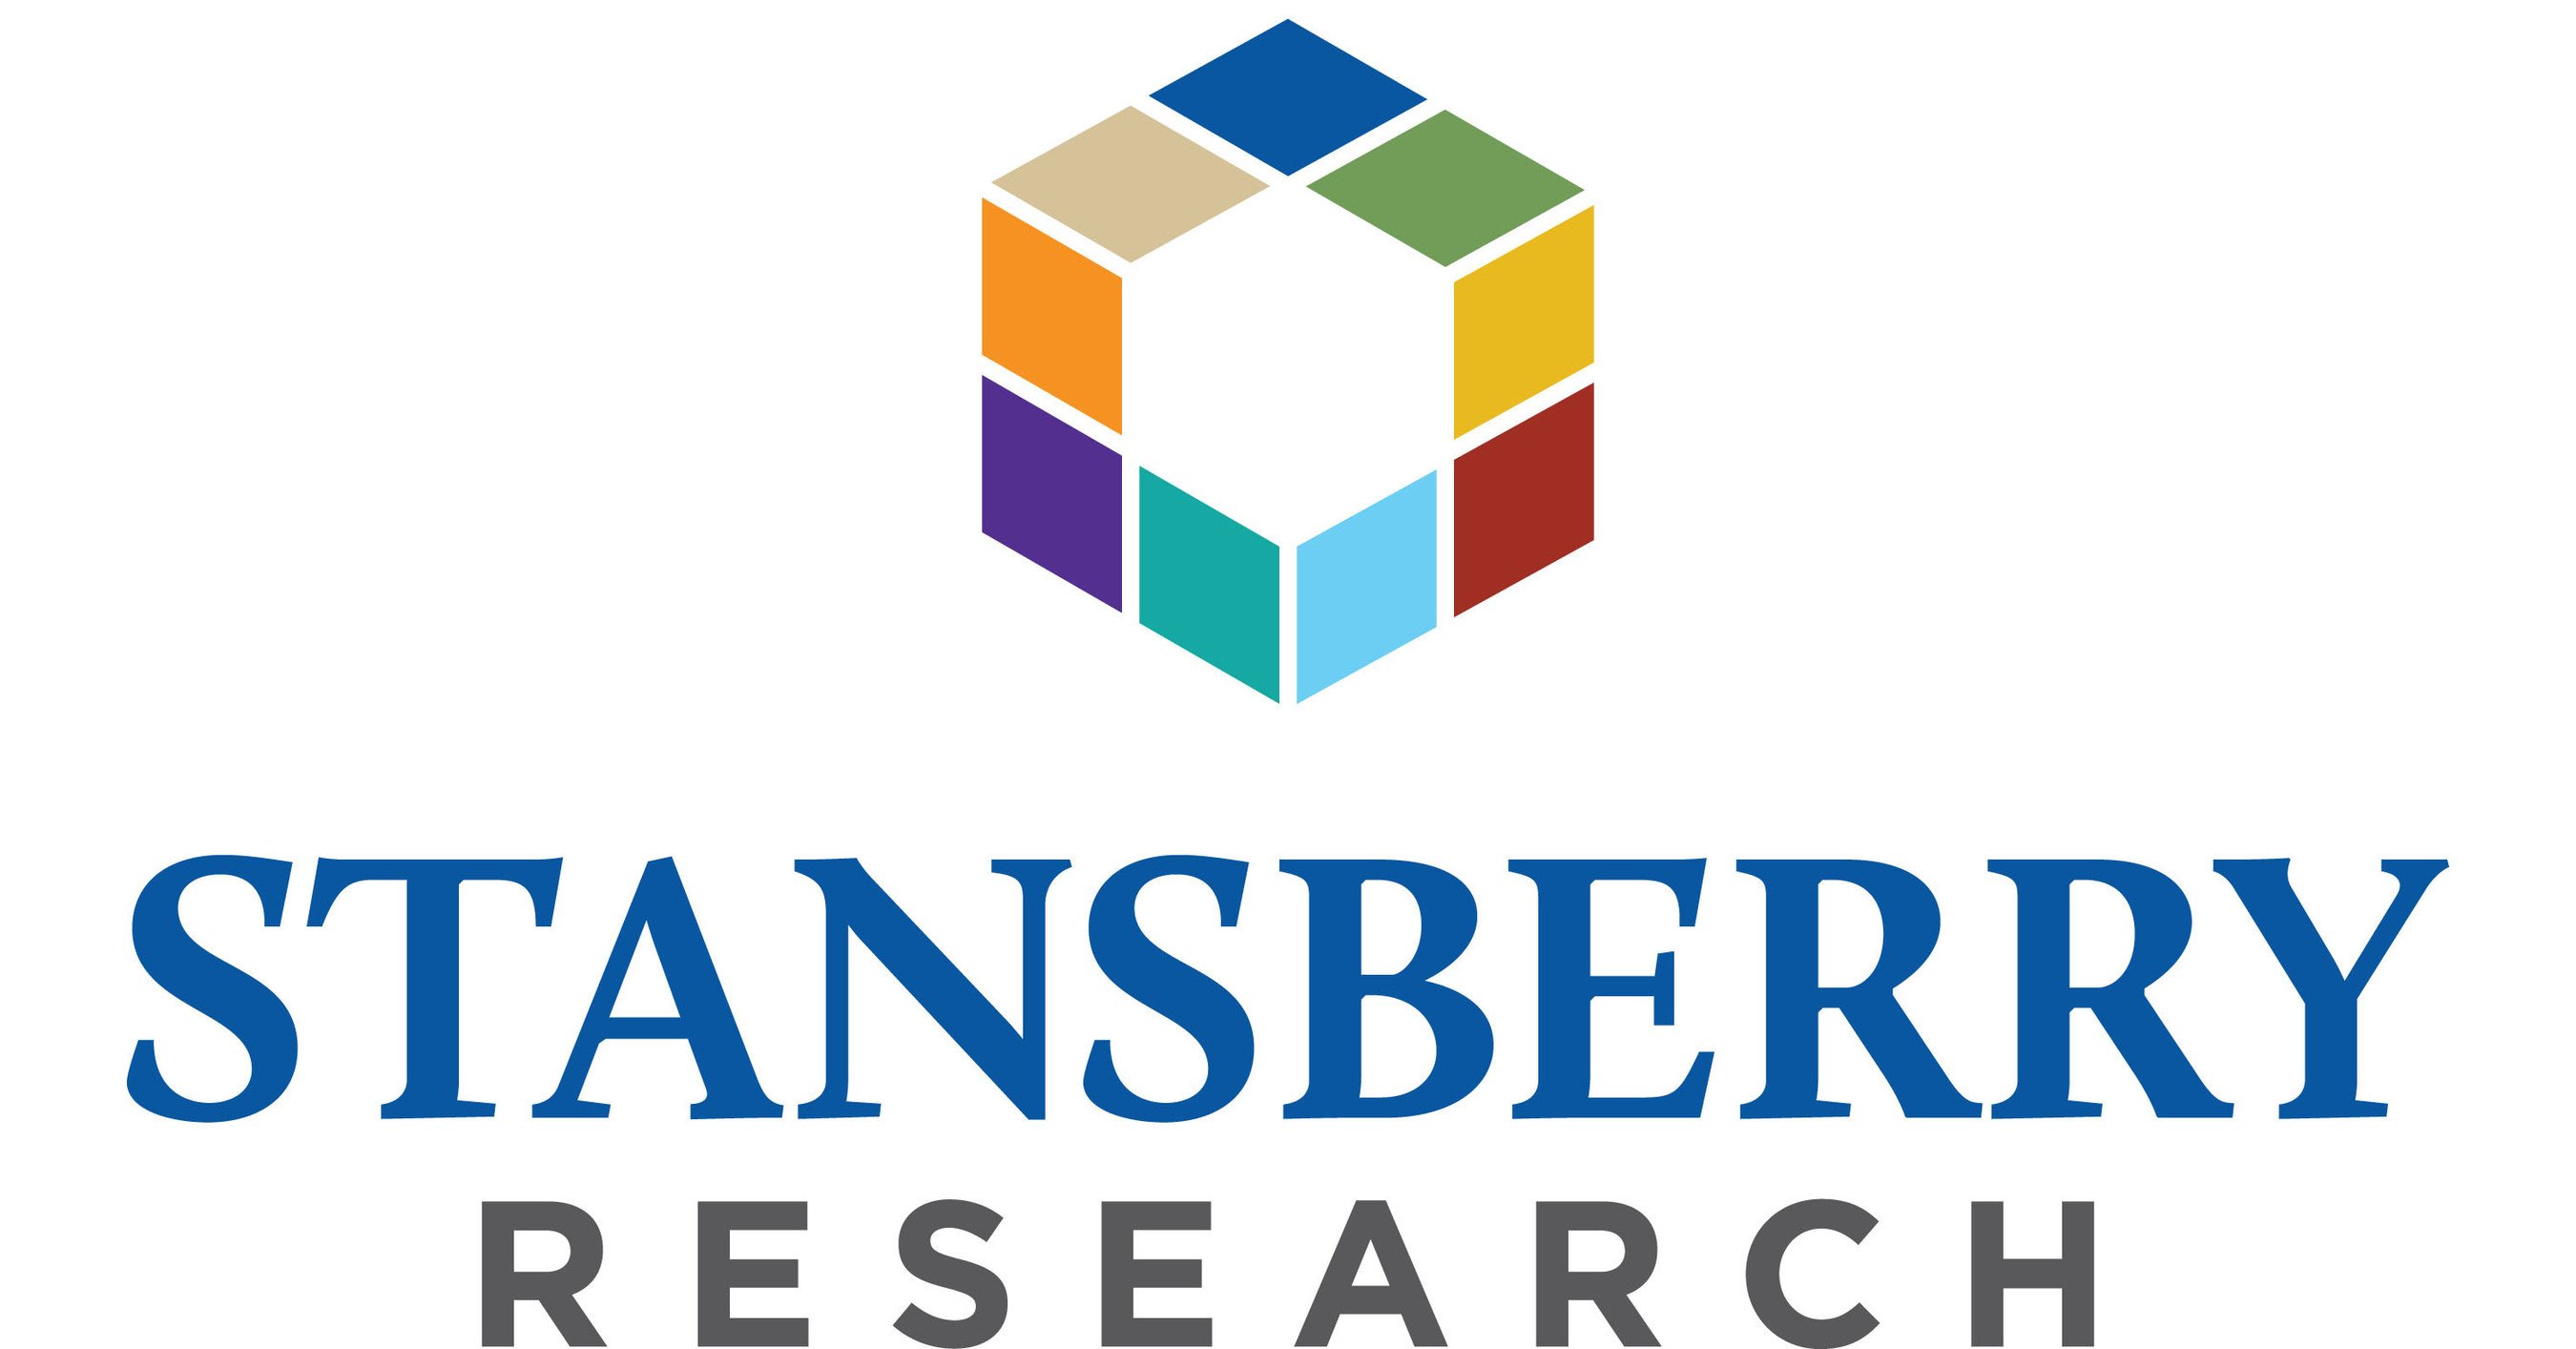 Stansberry Research logo